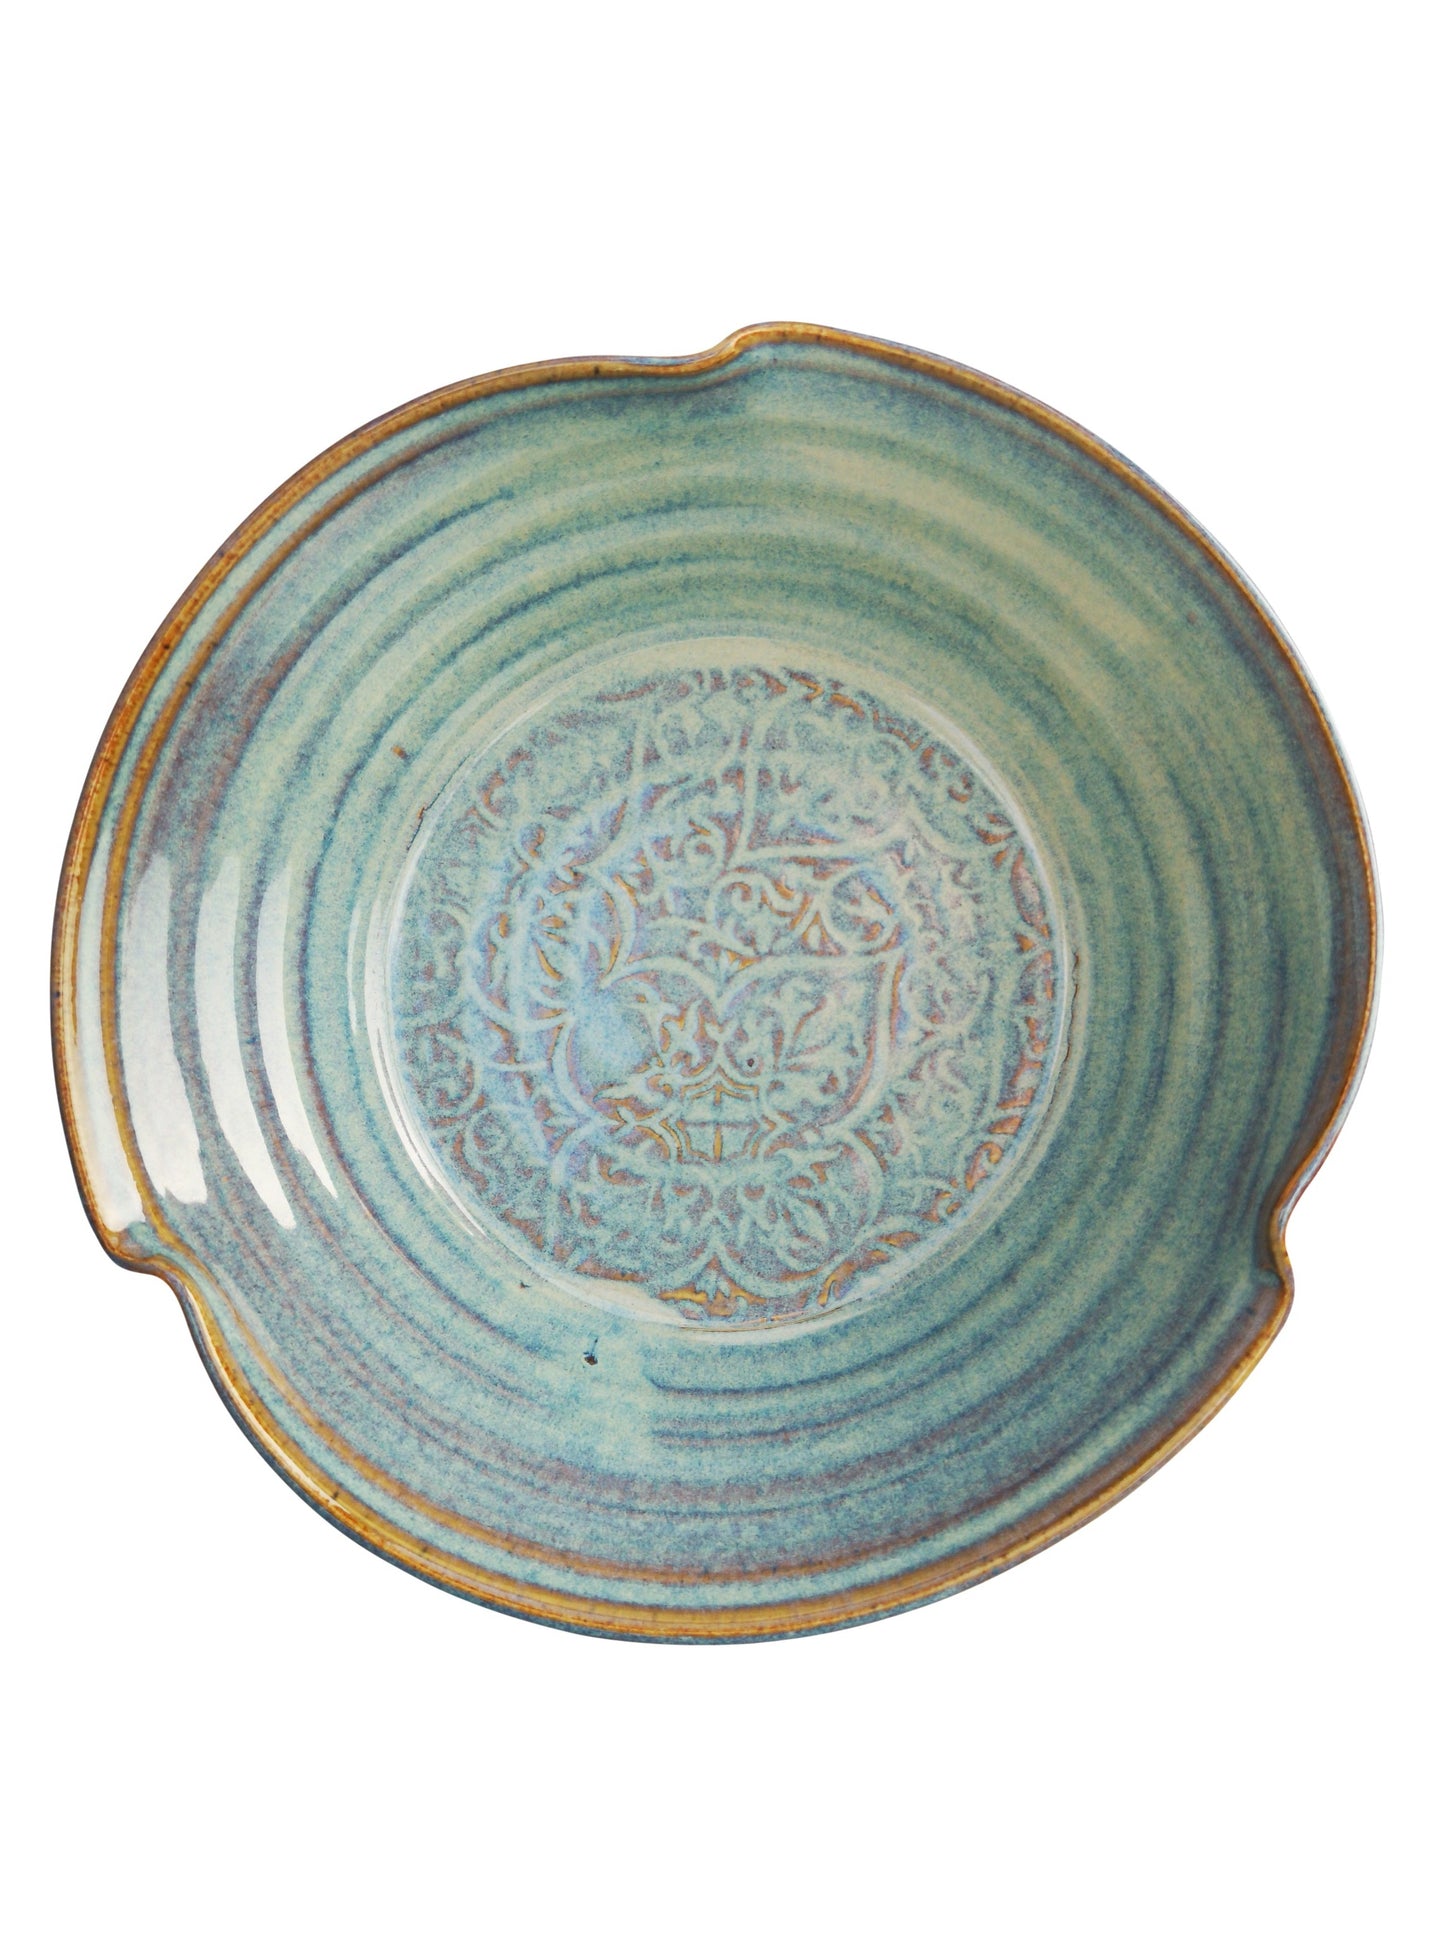 Green Salad Bowl with Textured pattern and wavy rim. Made by Castle Arch Pottery 